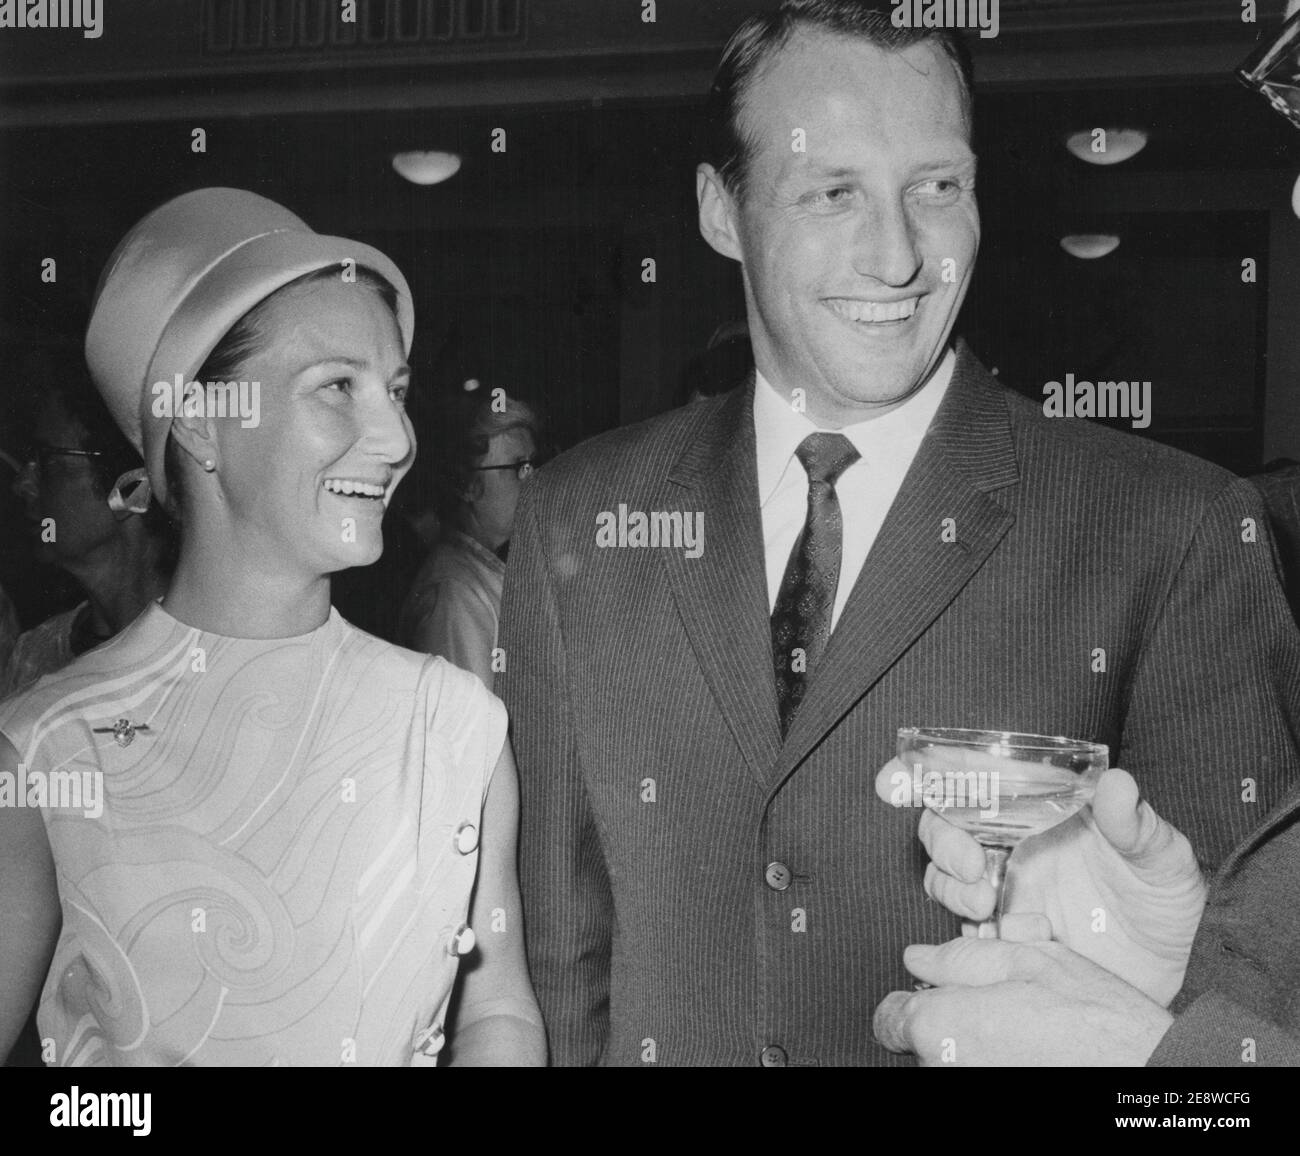 King Harald of Norway. Pictured when being crown prince with his wife Sonja in the 1960s Stock Photo